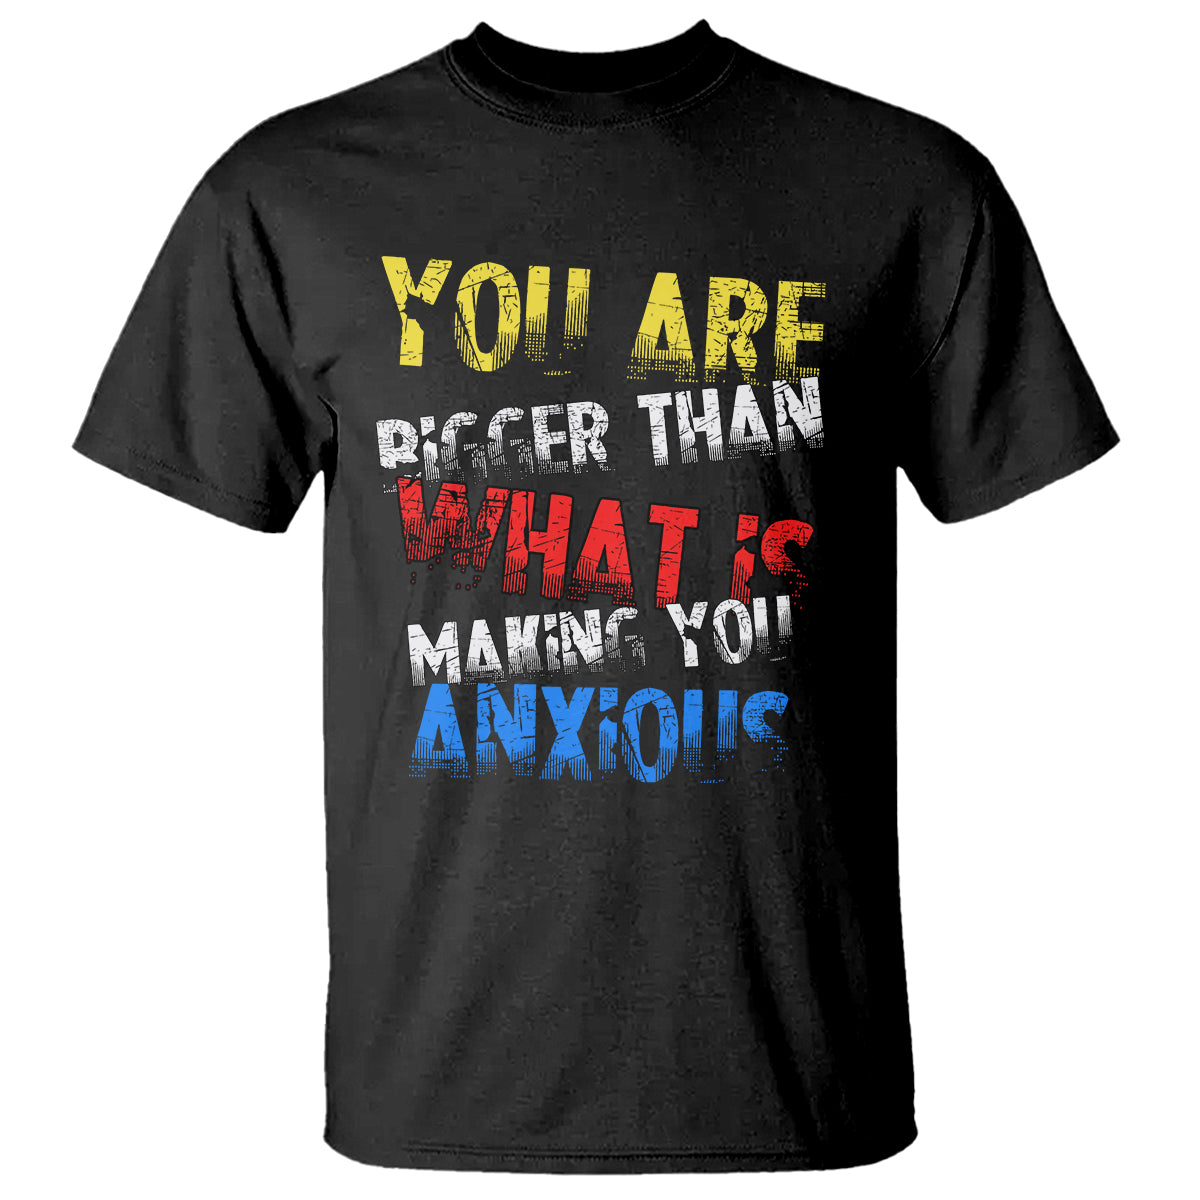 You Are Bigger Than What Is Making You Anxious T Shirt TS09 Black Printyourwear